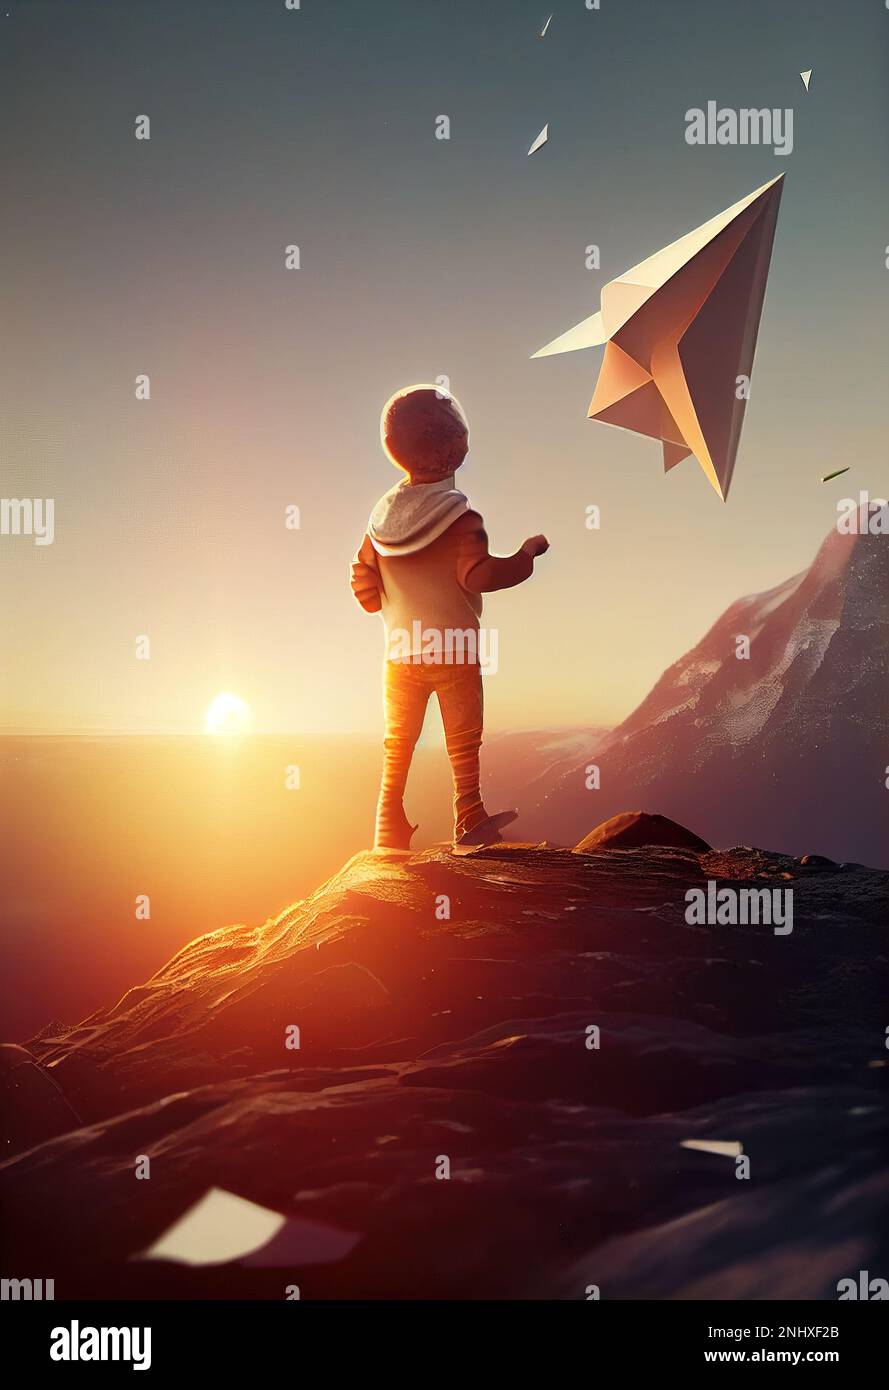 A little boy standing on a rock with a paper airplane in the sky above ...